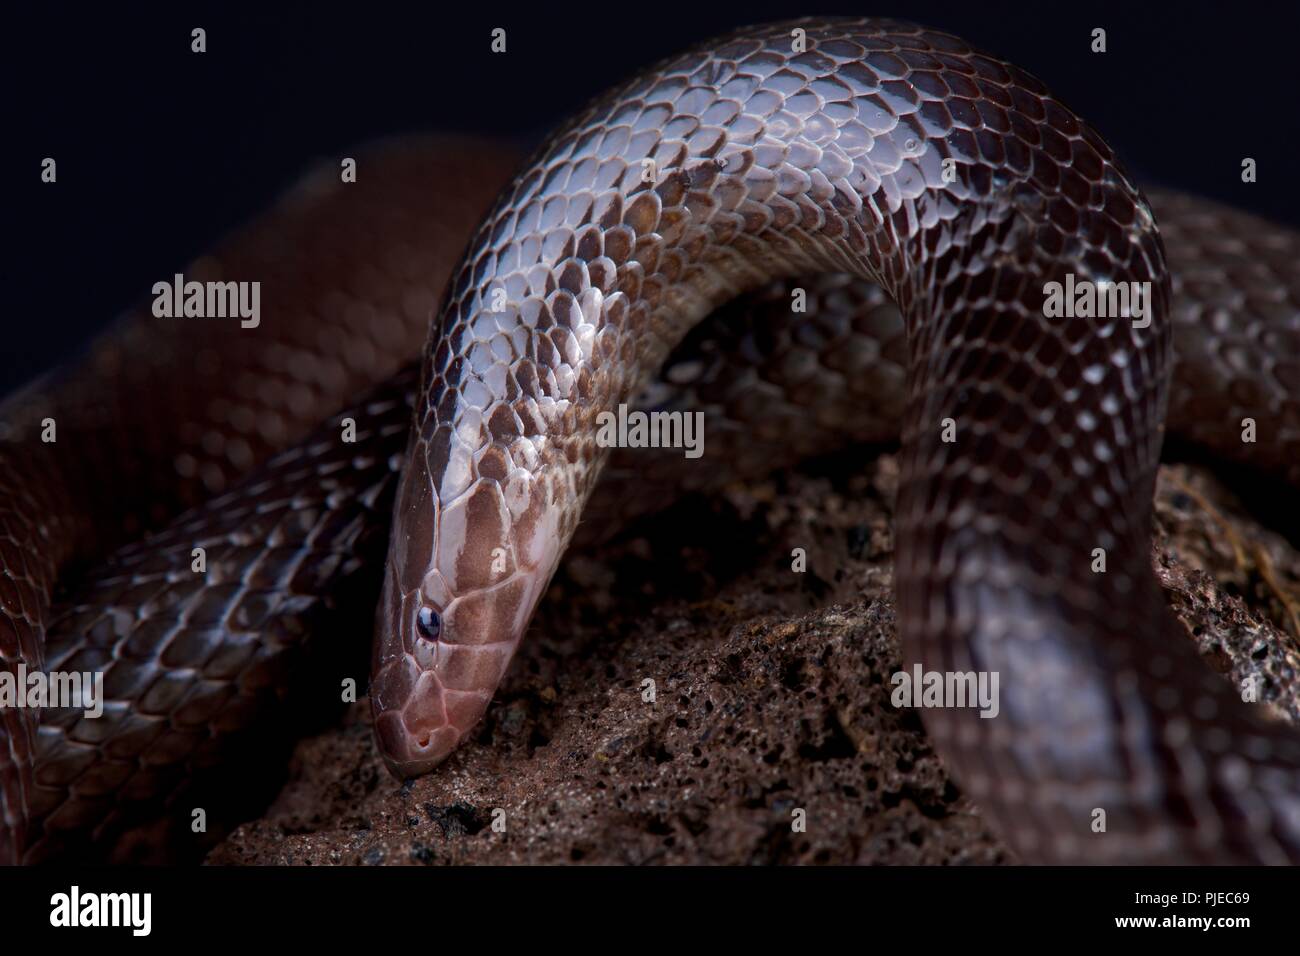 The Variable burrowing asp (Atractaspis irregularis) is a nocturnal and terrestrial snake species found in Southern Africa. Stock Photo